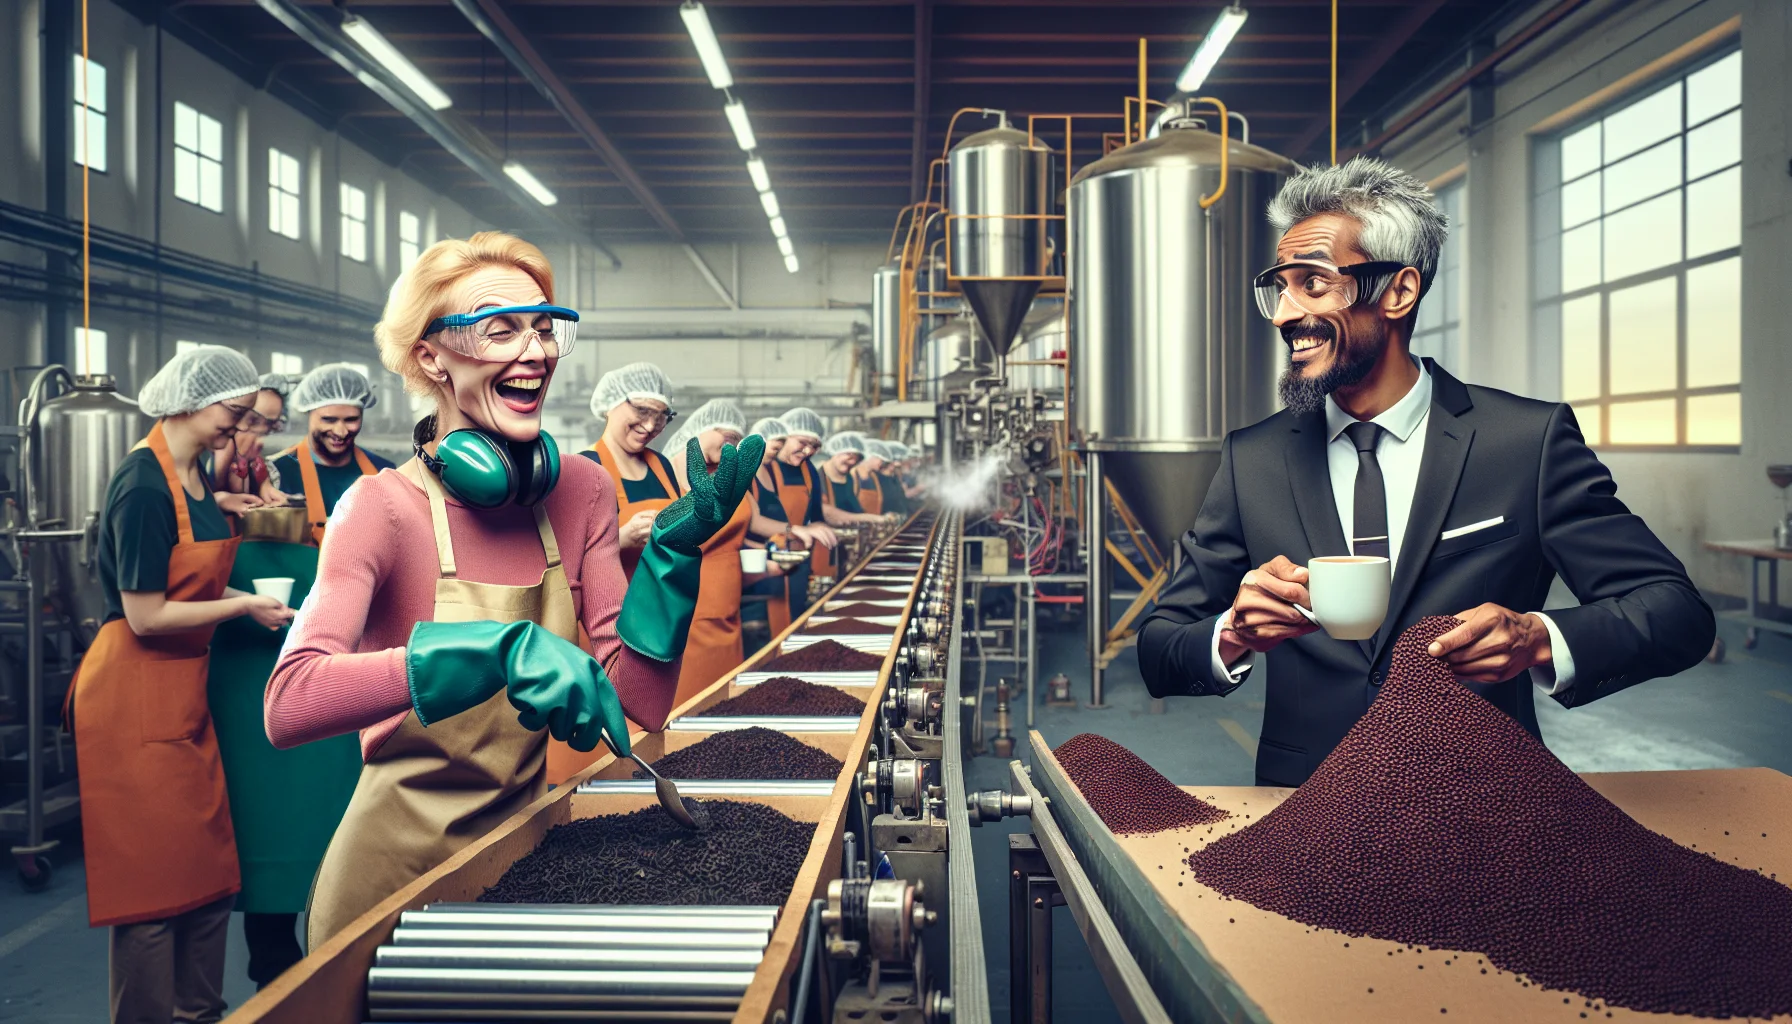 Develop a humorous, realistic scene situated in a brewing factory. In the foreground, envision a female Caucasian brewmaster with safety goggles and apron, enthusiastically testing a freshly brewed tea; next to her, a male South Asian coffee industry executive, dressed in a sharp business suit, holding a steaming cup of their latest coffee blend. Their expressions mirror mild competition and playful mockery. In the background, see conveyor belts bustling with boxes of tea and coffee products, and workers from varied descents and genders operating machinery filling bags with fresh tea leaves and coffee beans.